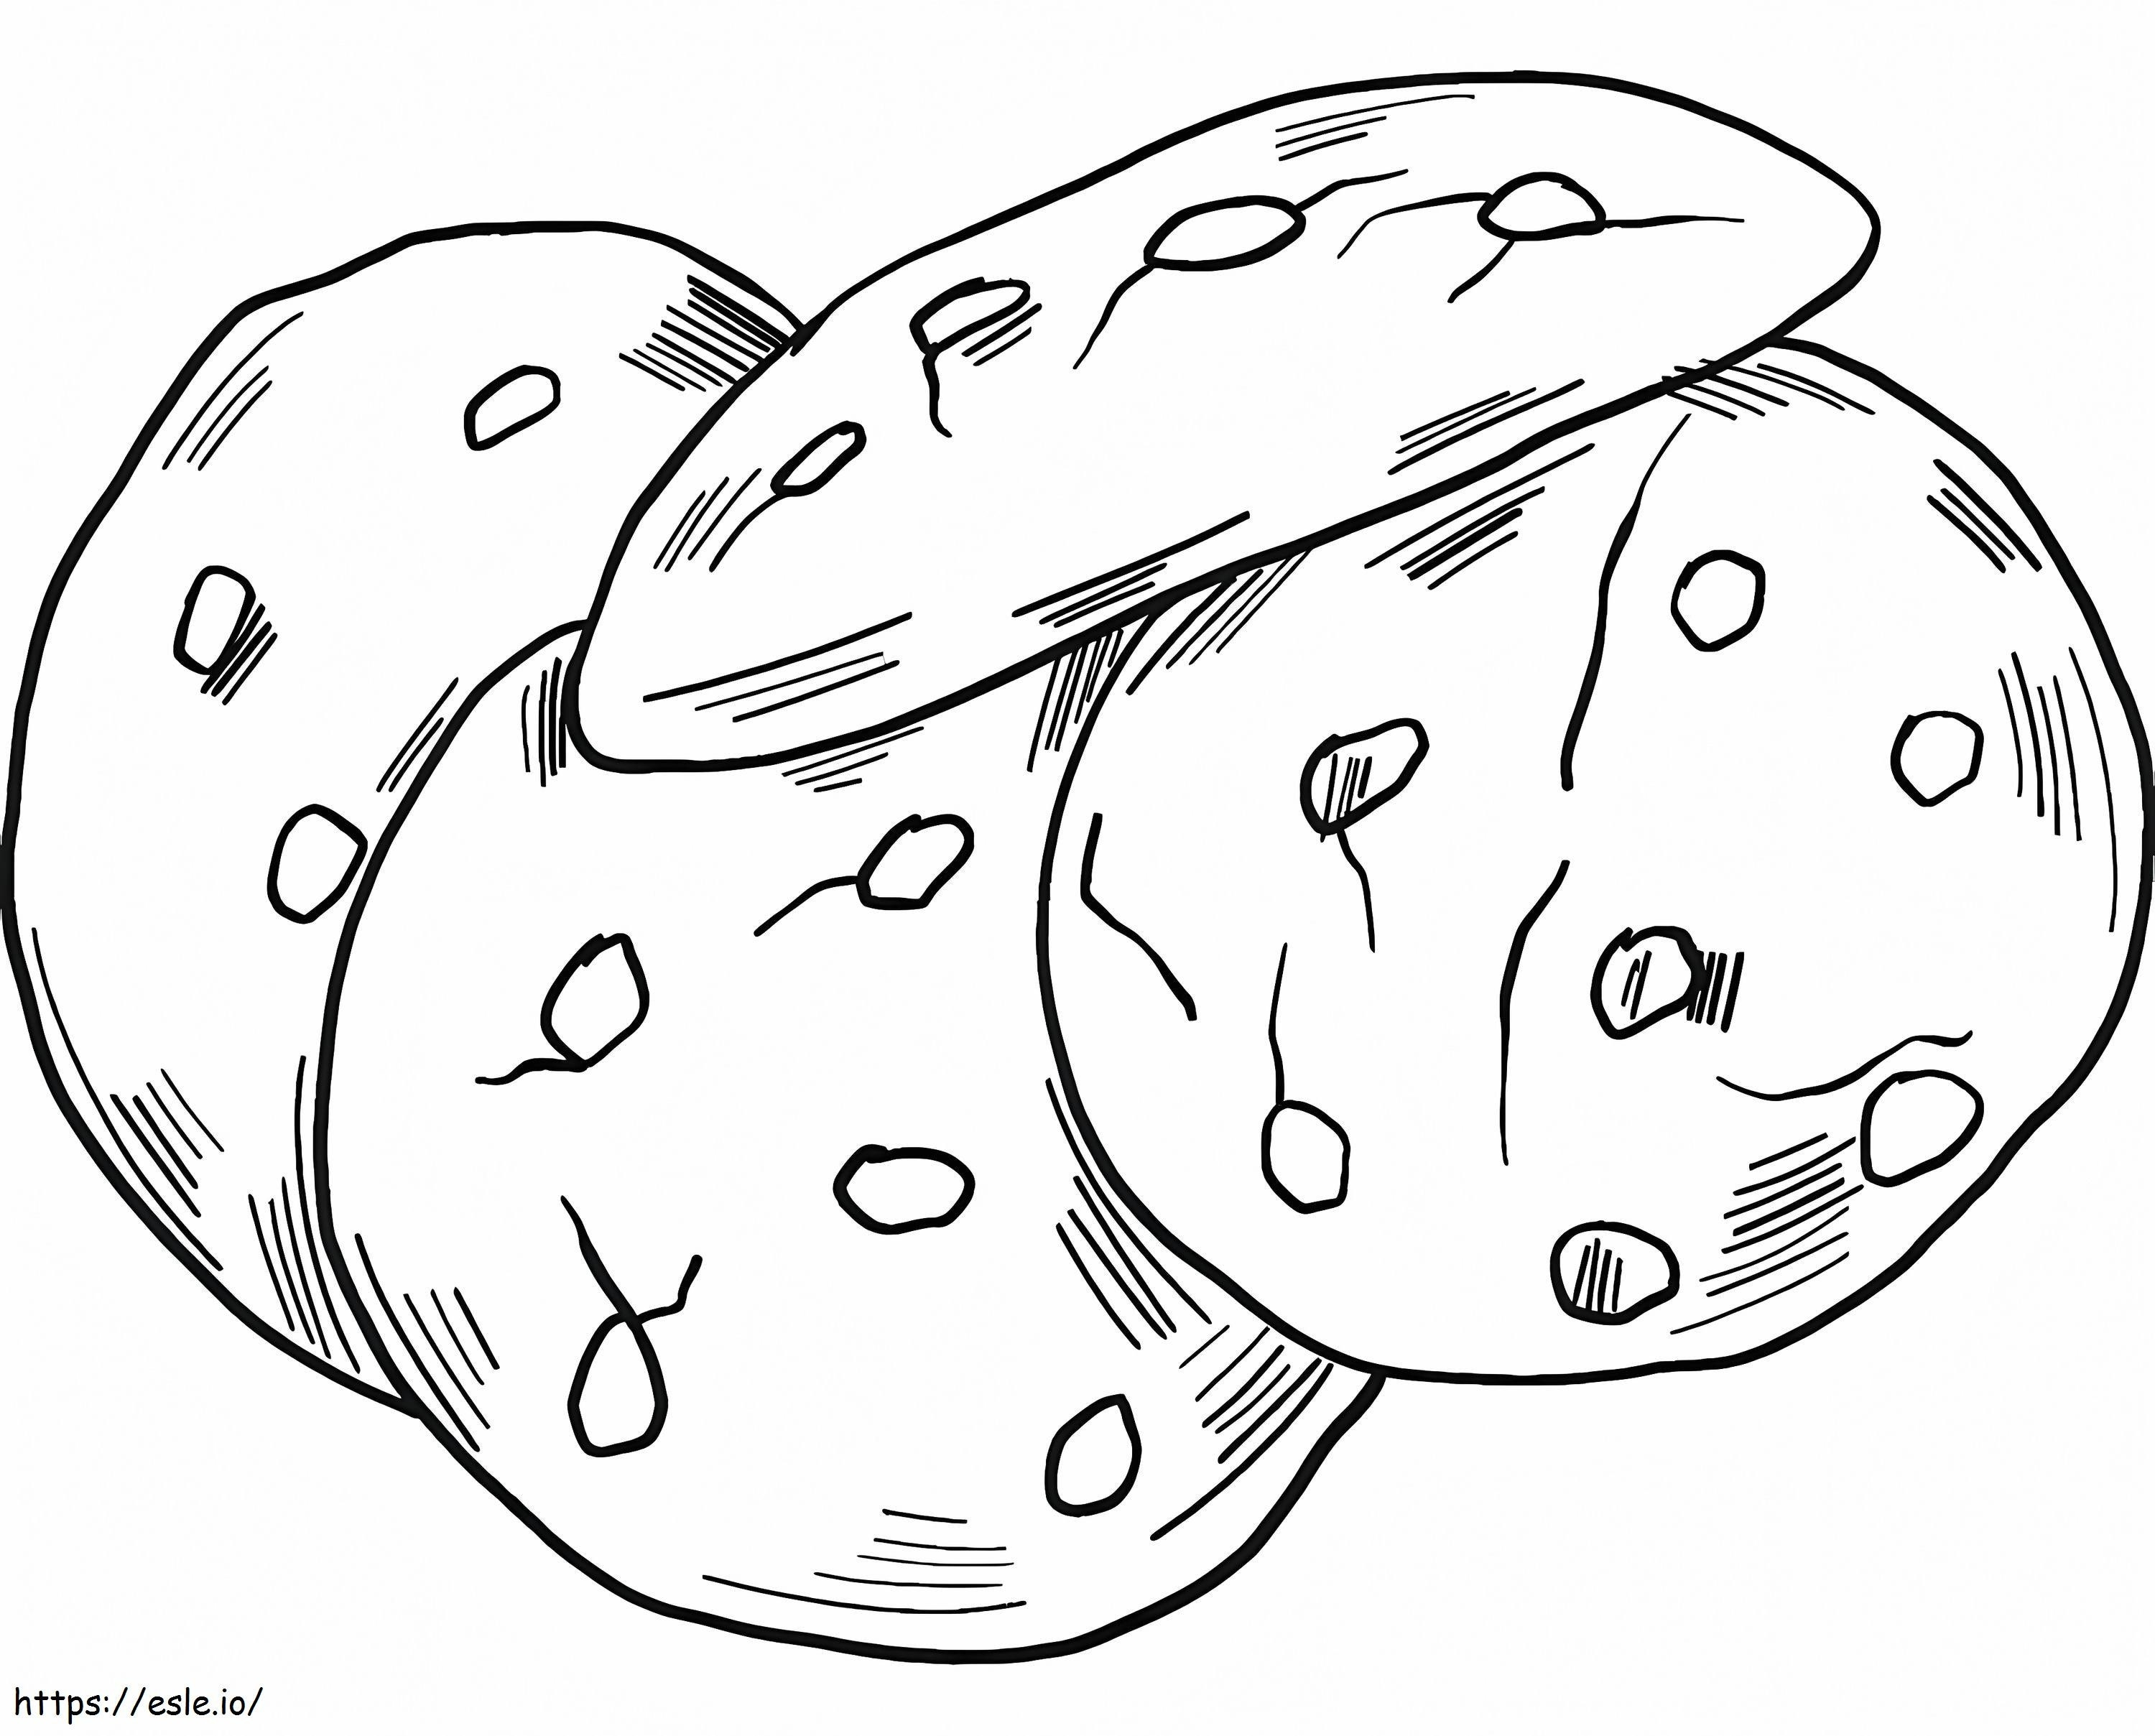 Chocolate Chip Cookies coloring page